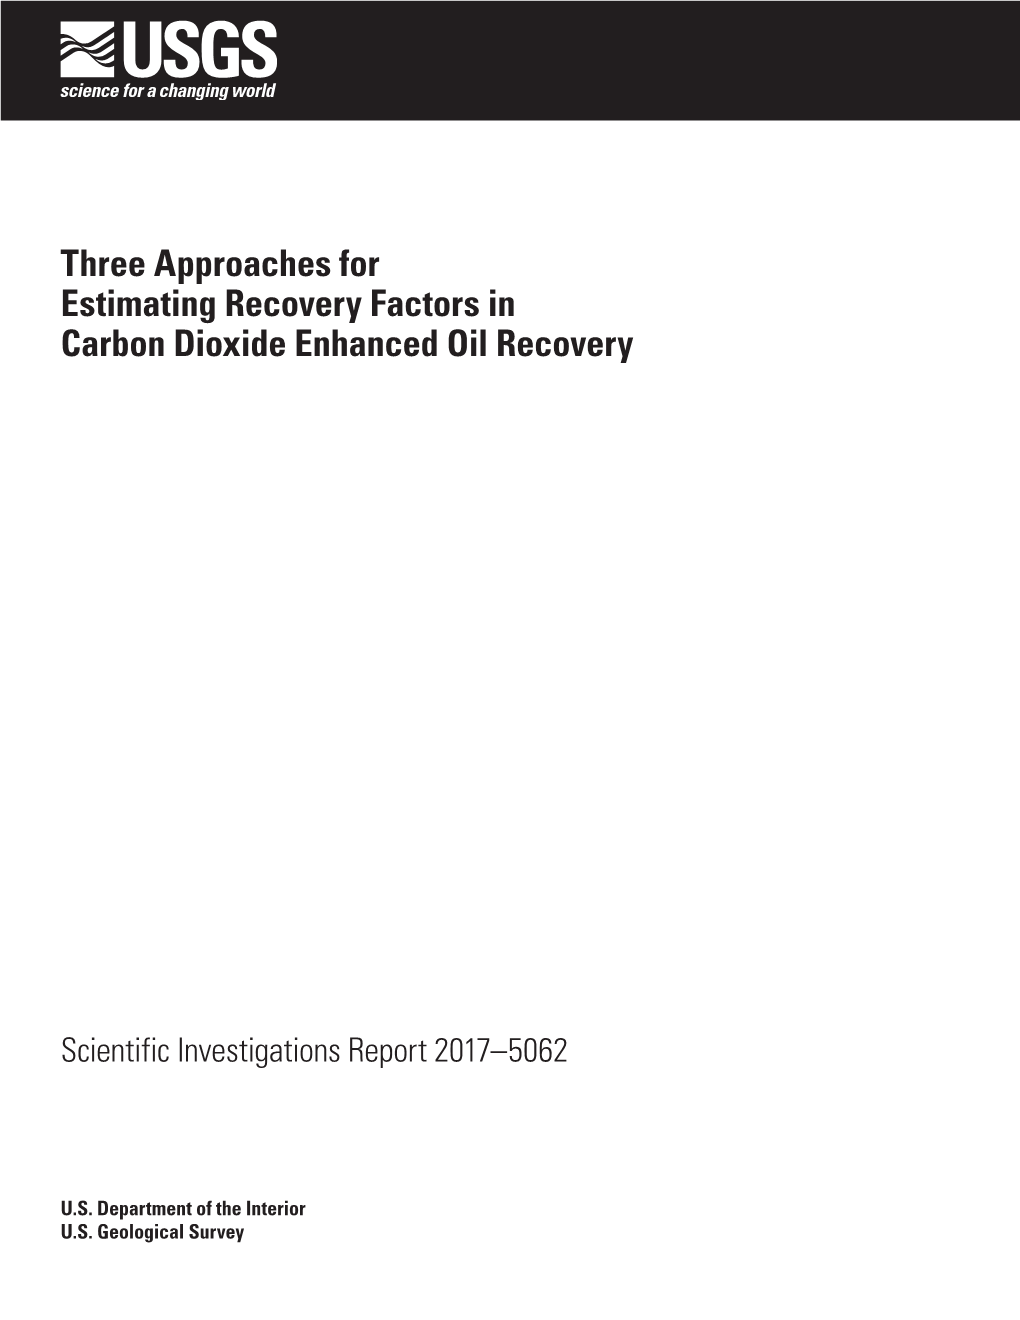 Three Approaches for Estimating Recovery Factors in Carbon Dioxide Enhanced Oil Recovery